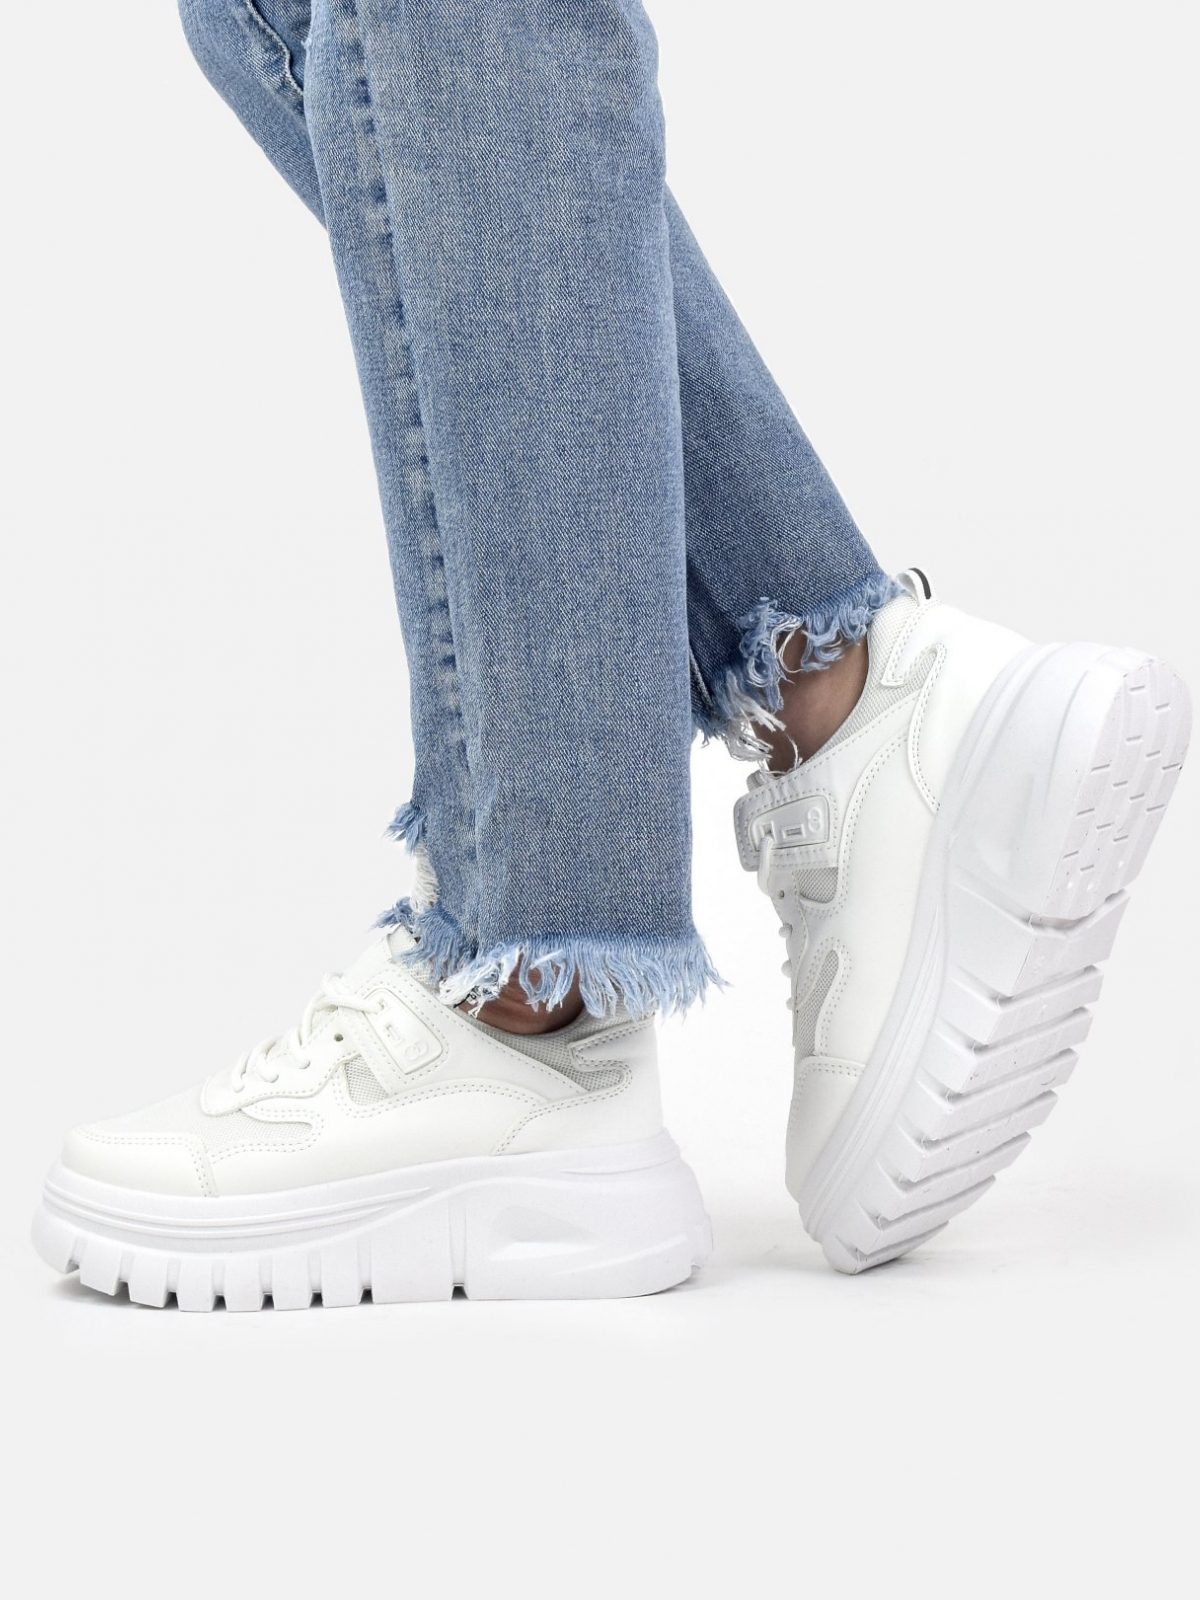 American style sneaker with thick sole in white